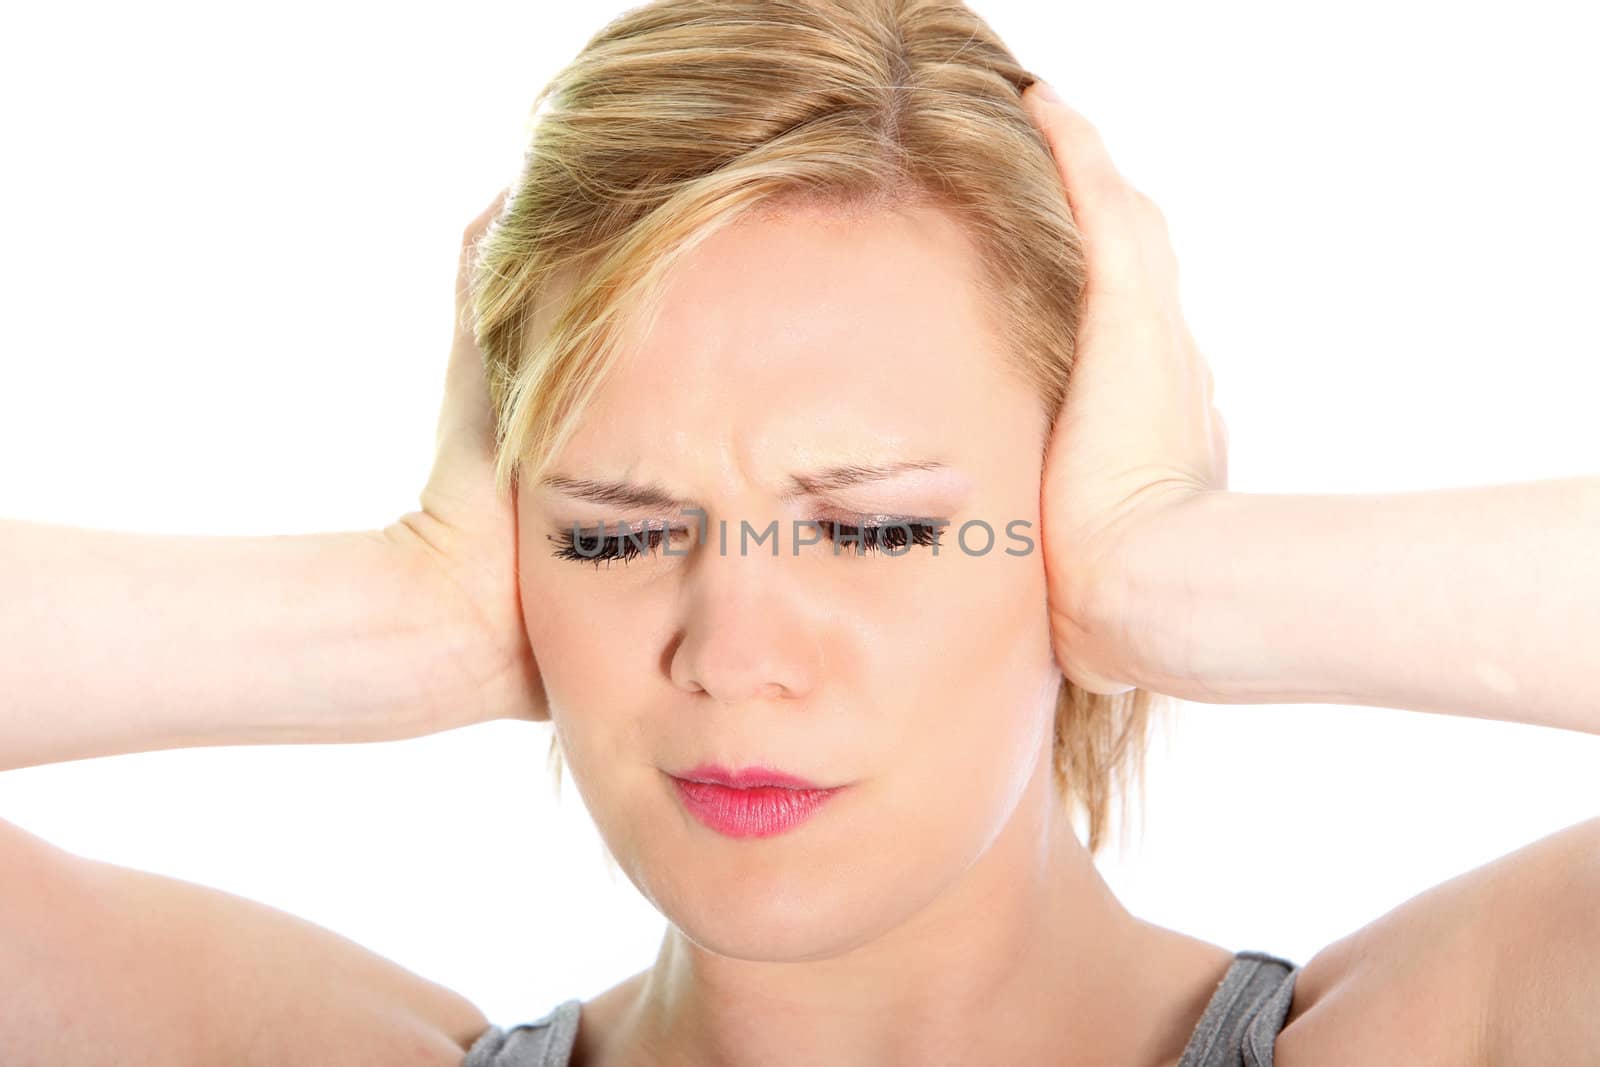 Woman suffering from a headache grimacing and holding her hands to her ears to relieve the throbbing, closeup studio head portrait on white